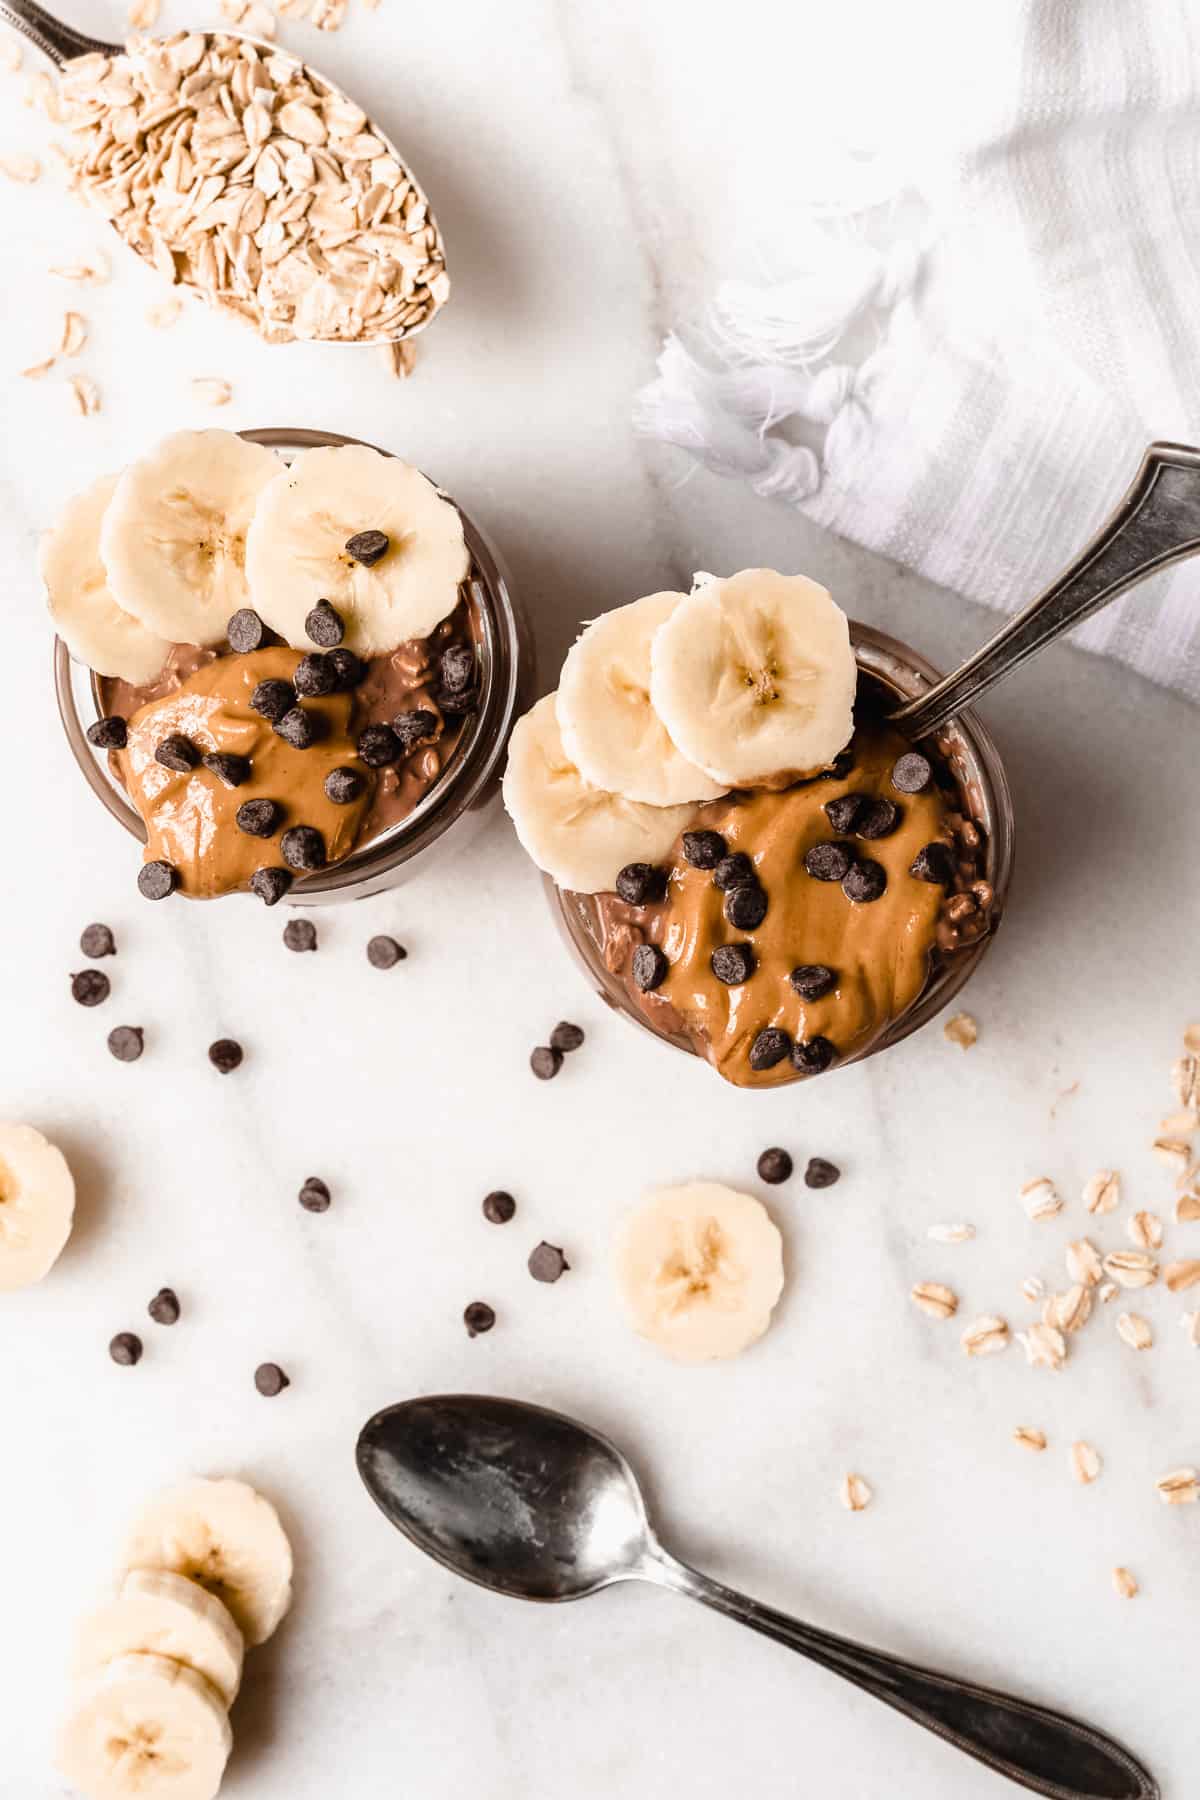 Two jars filled with chocolate oats from above with peanut butter, banana slices, and chocolate chips on top.